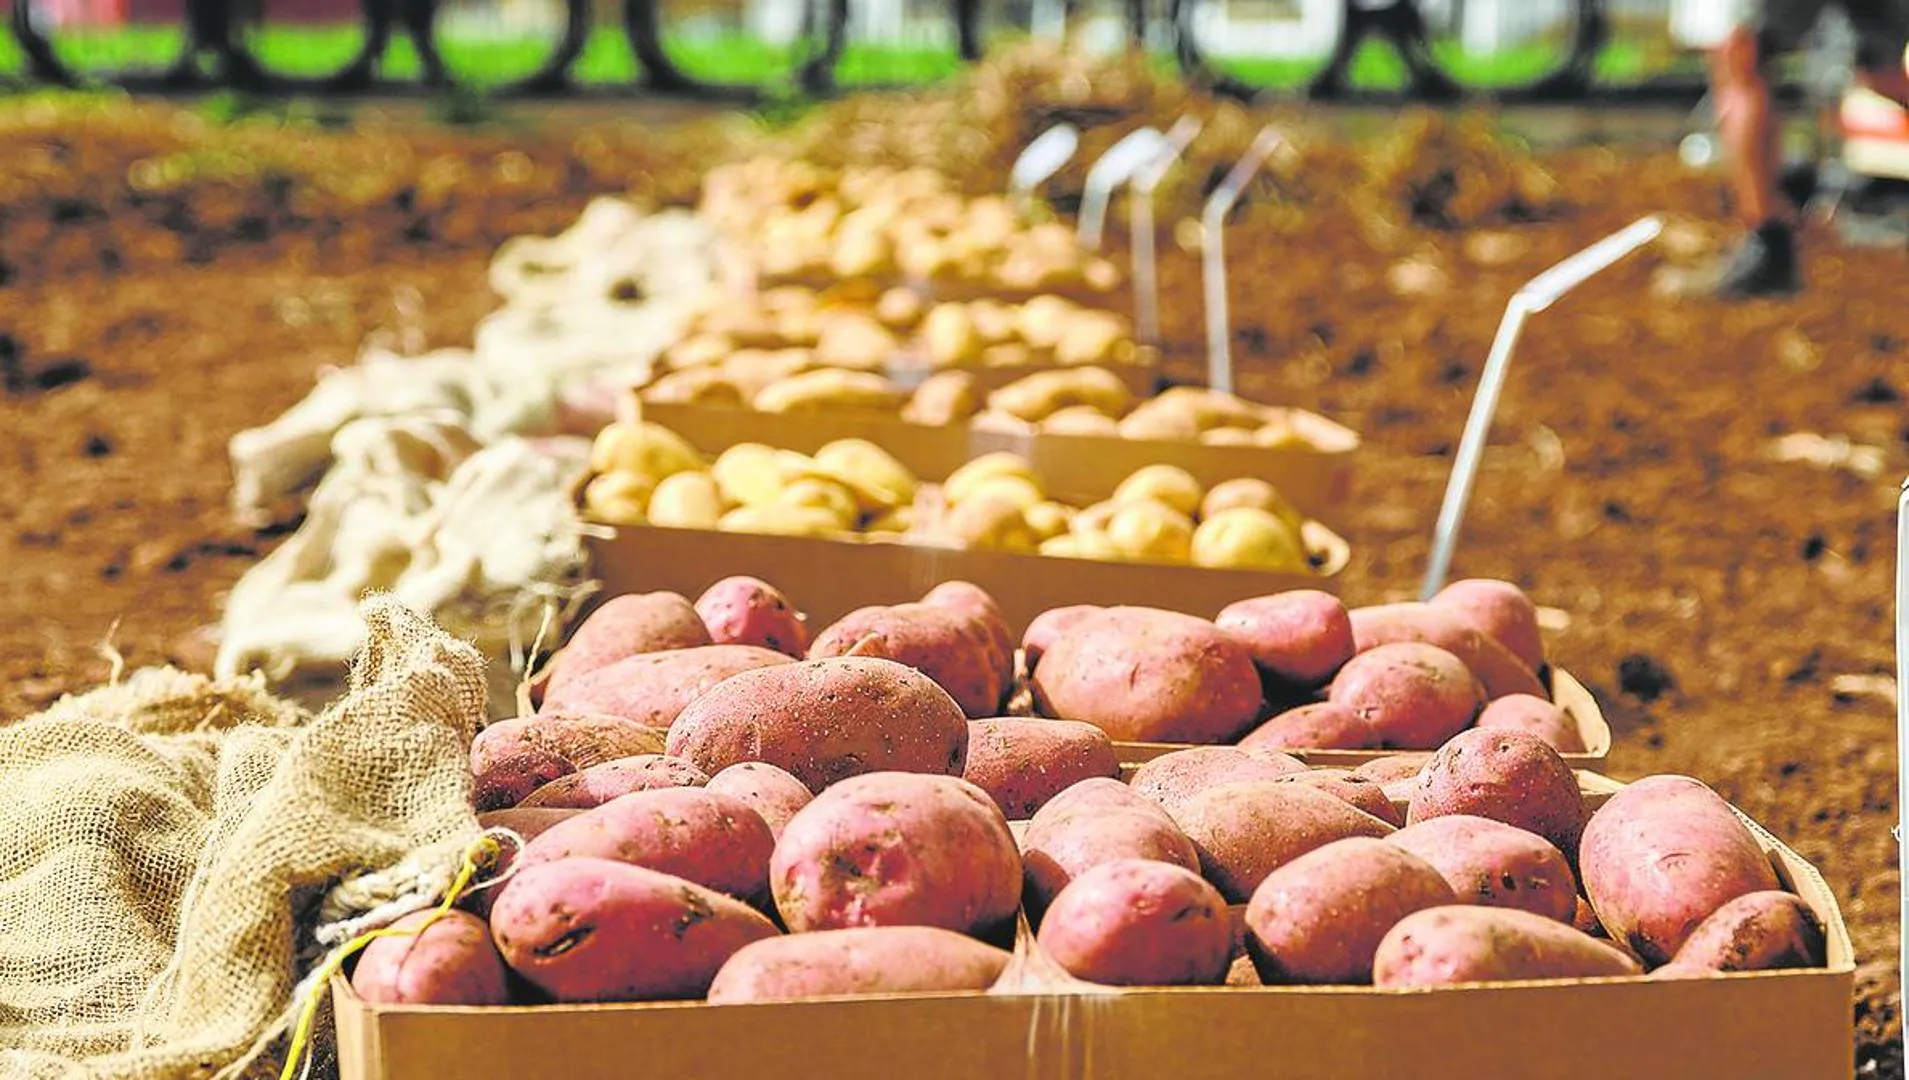 The price of potatoes shoots up 60% in a week despite the arrival of the product